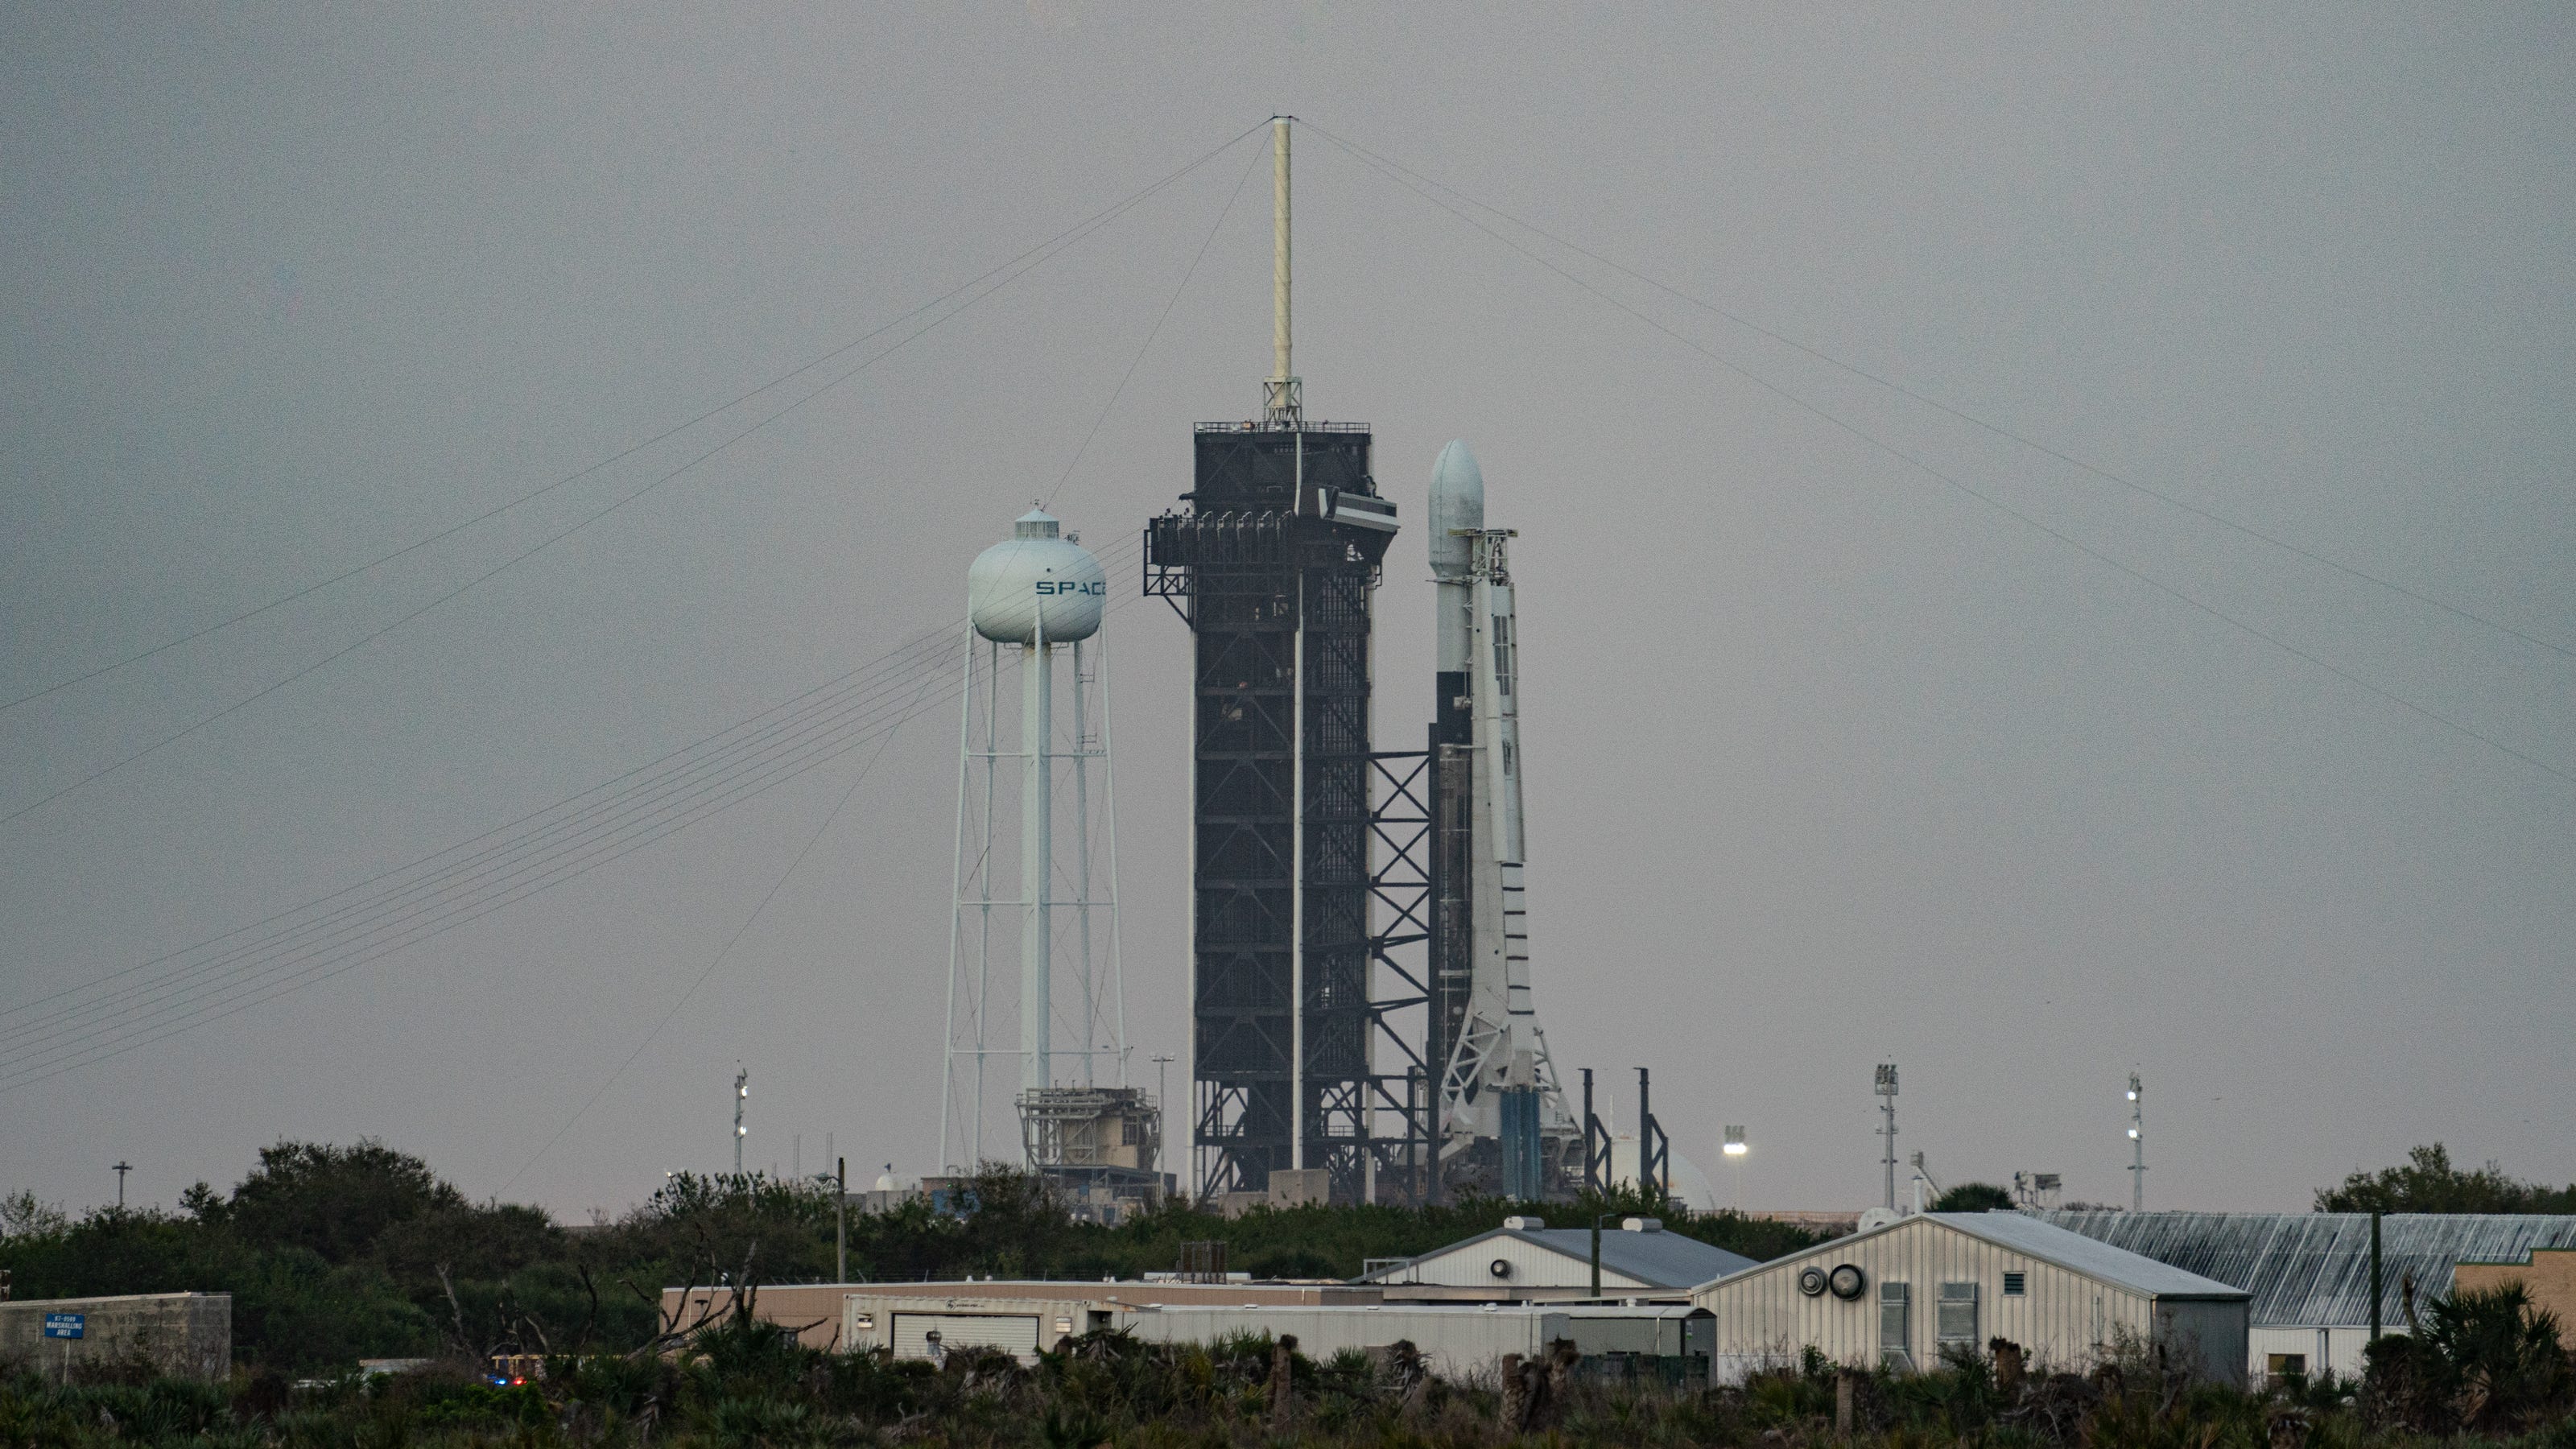 SpaceX delays upcoming Starlink launch from Kennedy Space Center, shifts window - Florida Today